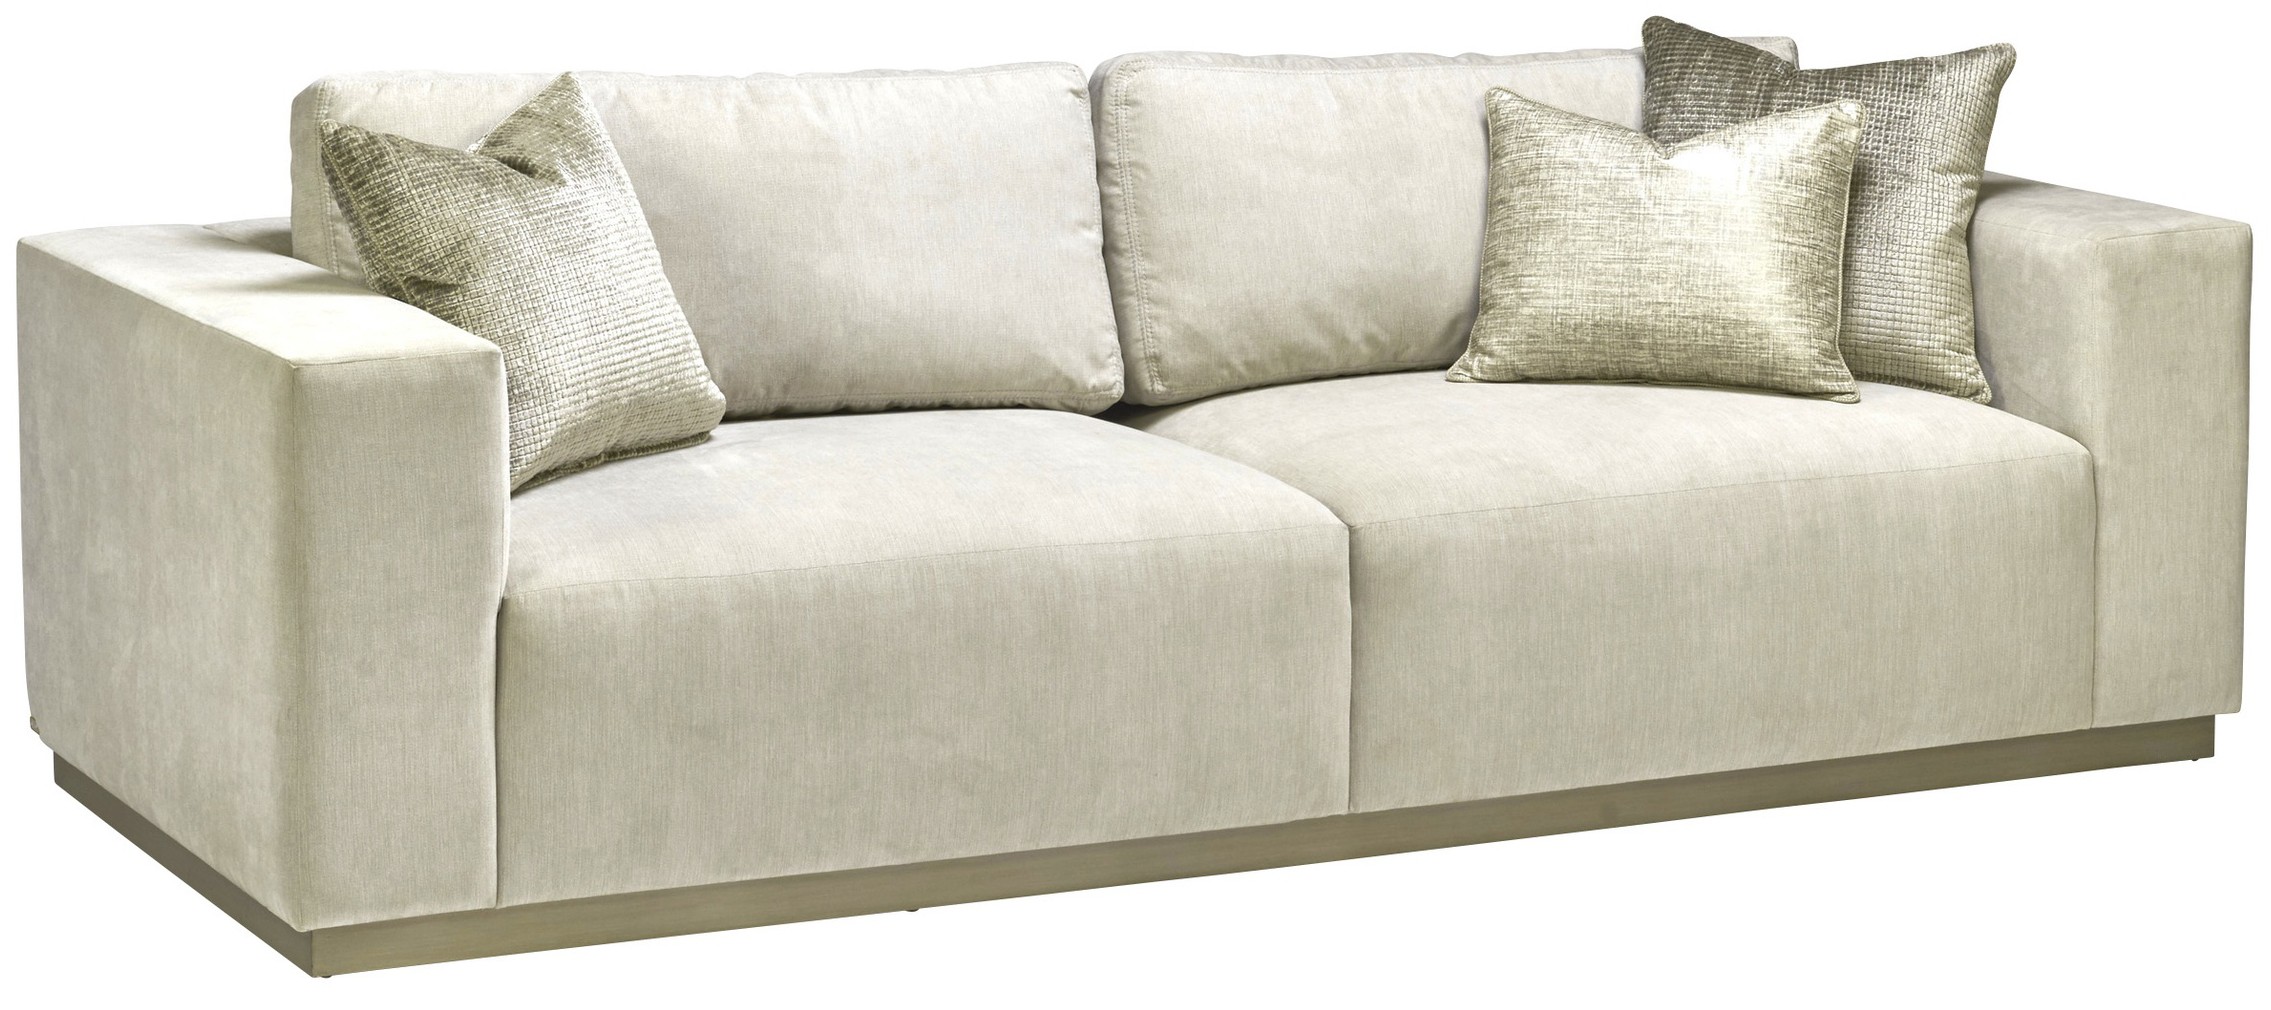 SOFA, COUCH & LOVESEAT Sofa 6066 from our modern Dakota collection